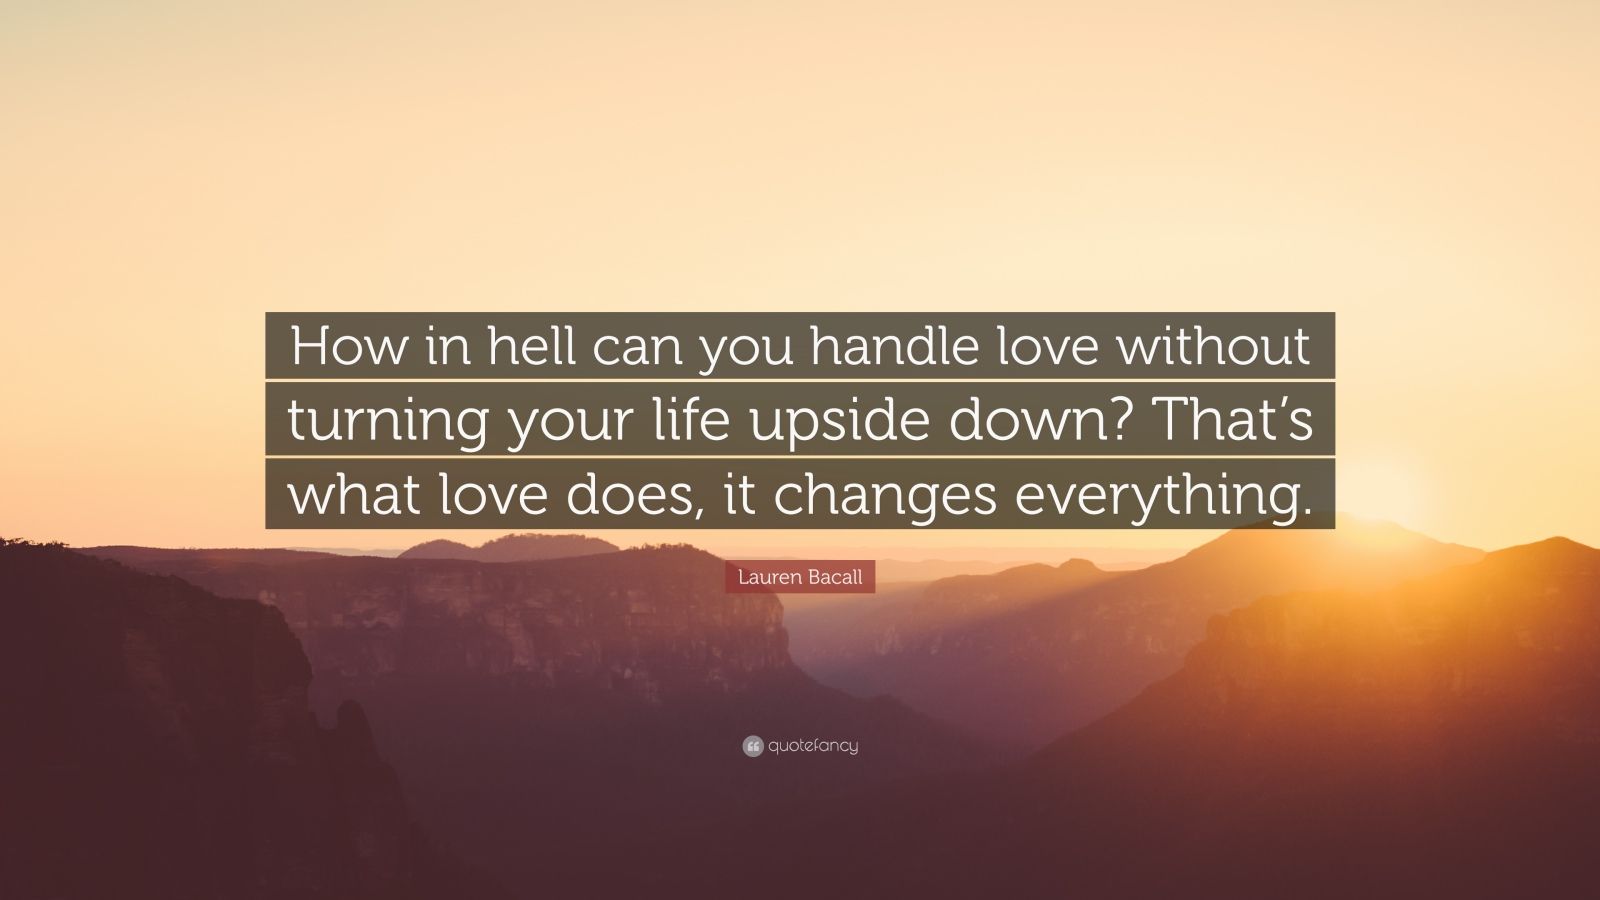 Lauren Bacall Quote “How in hell can you handle love without turning your life